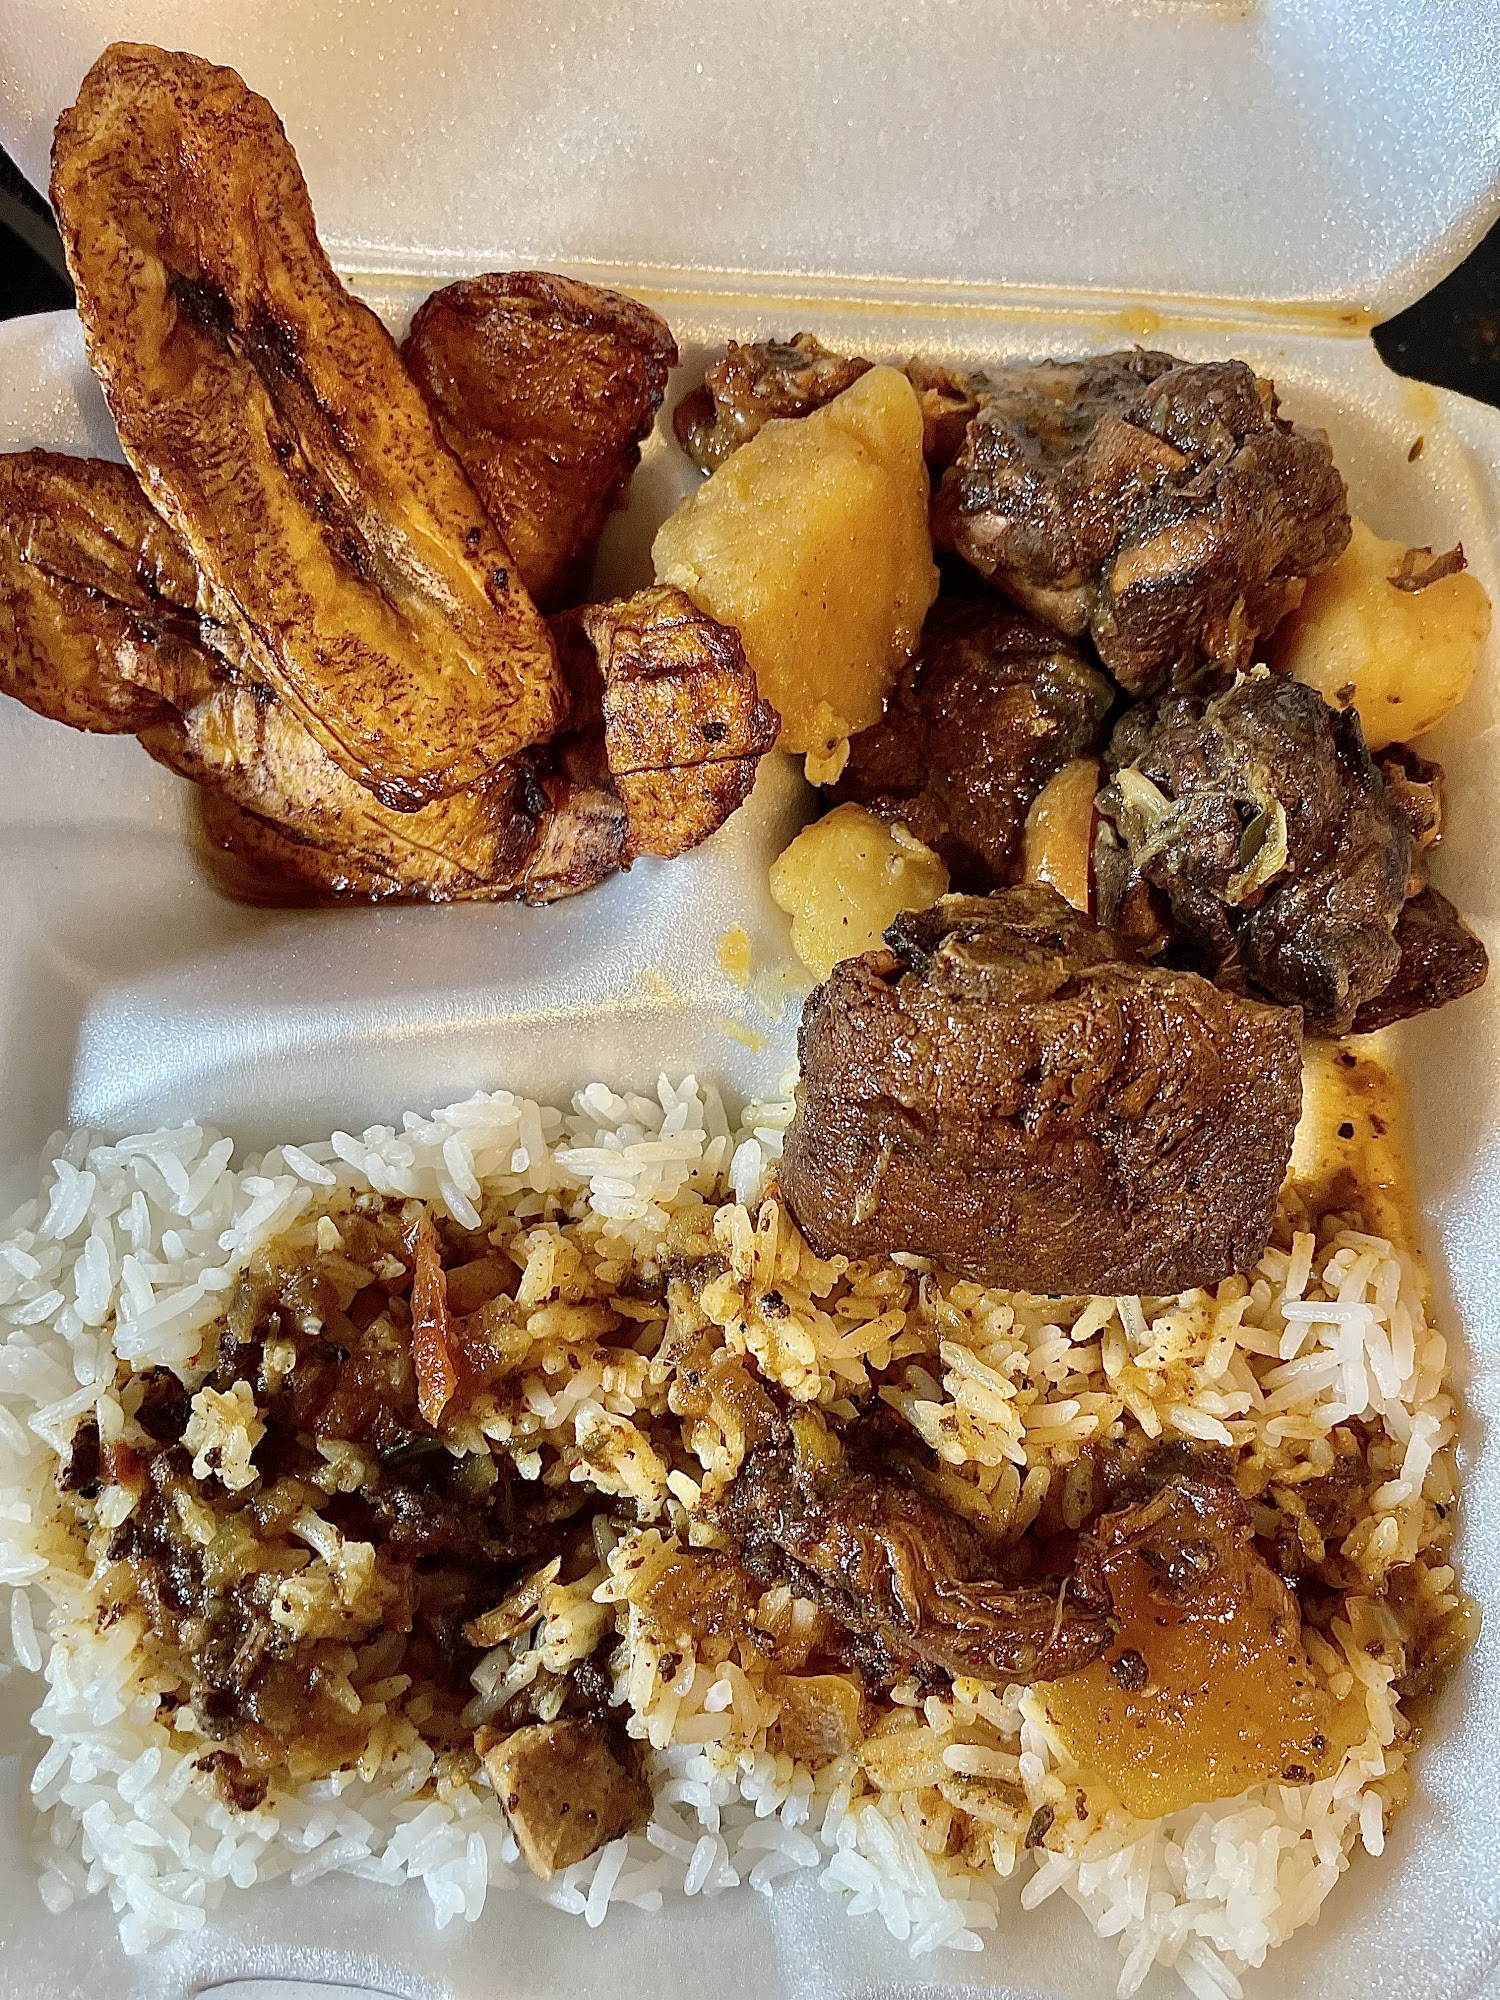 From Jamaica To You Takeout & Catering